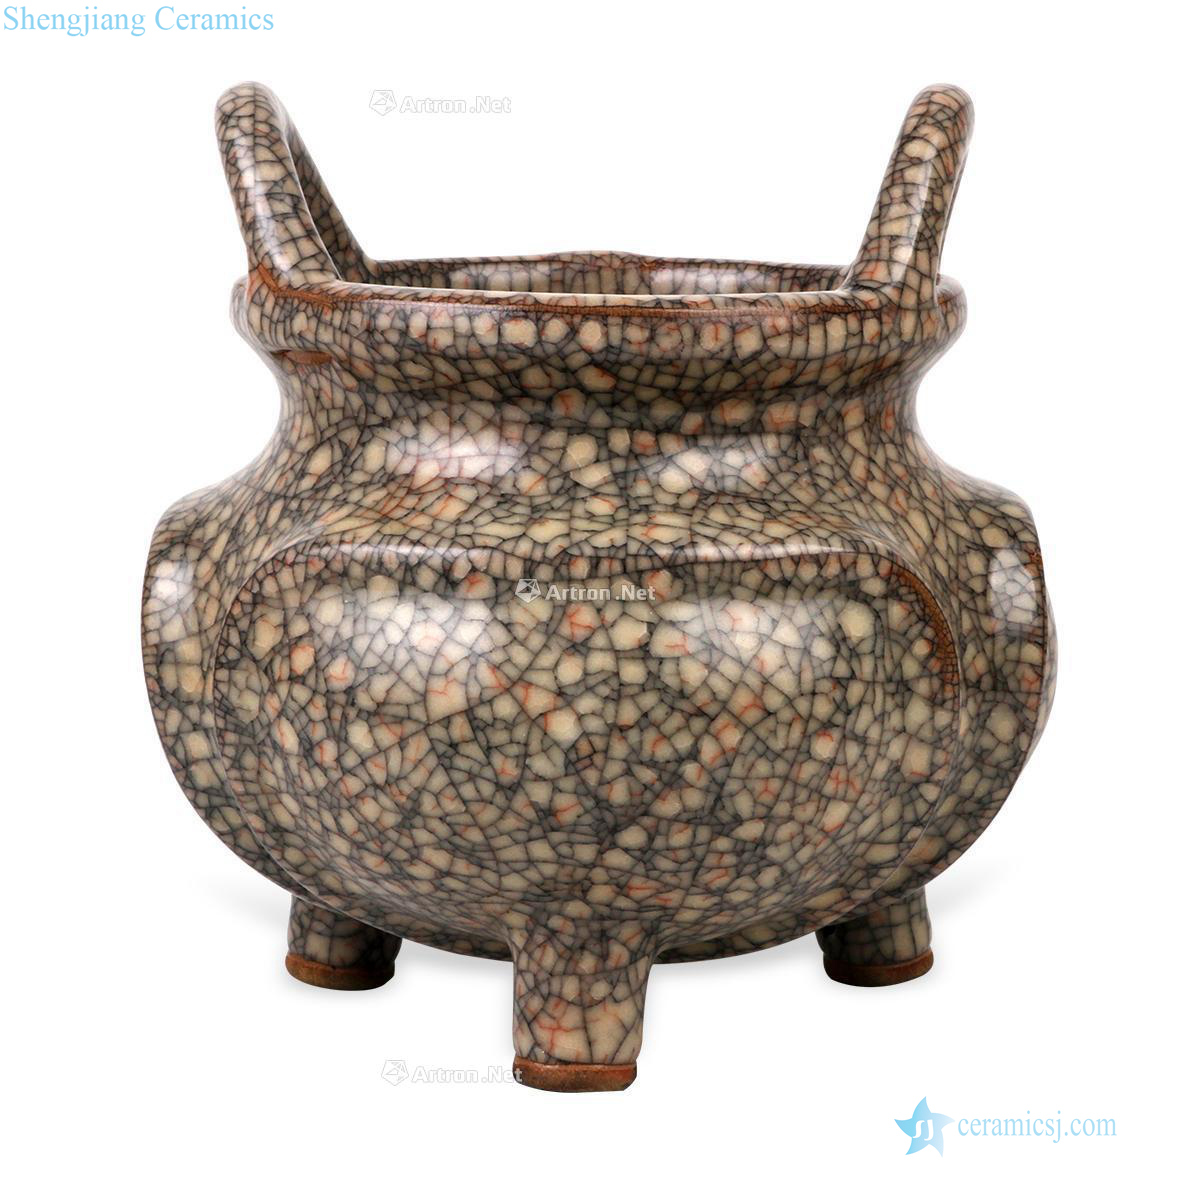 The song dynasty Kiln ears furnace with three legs